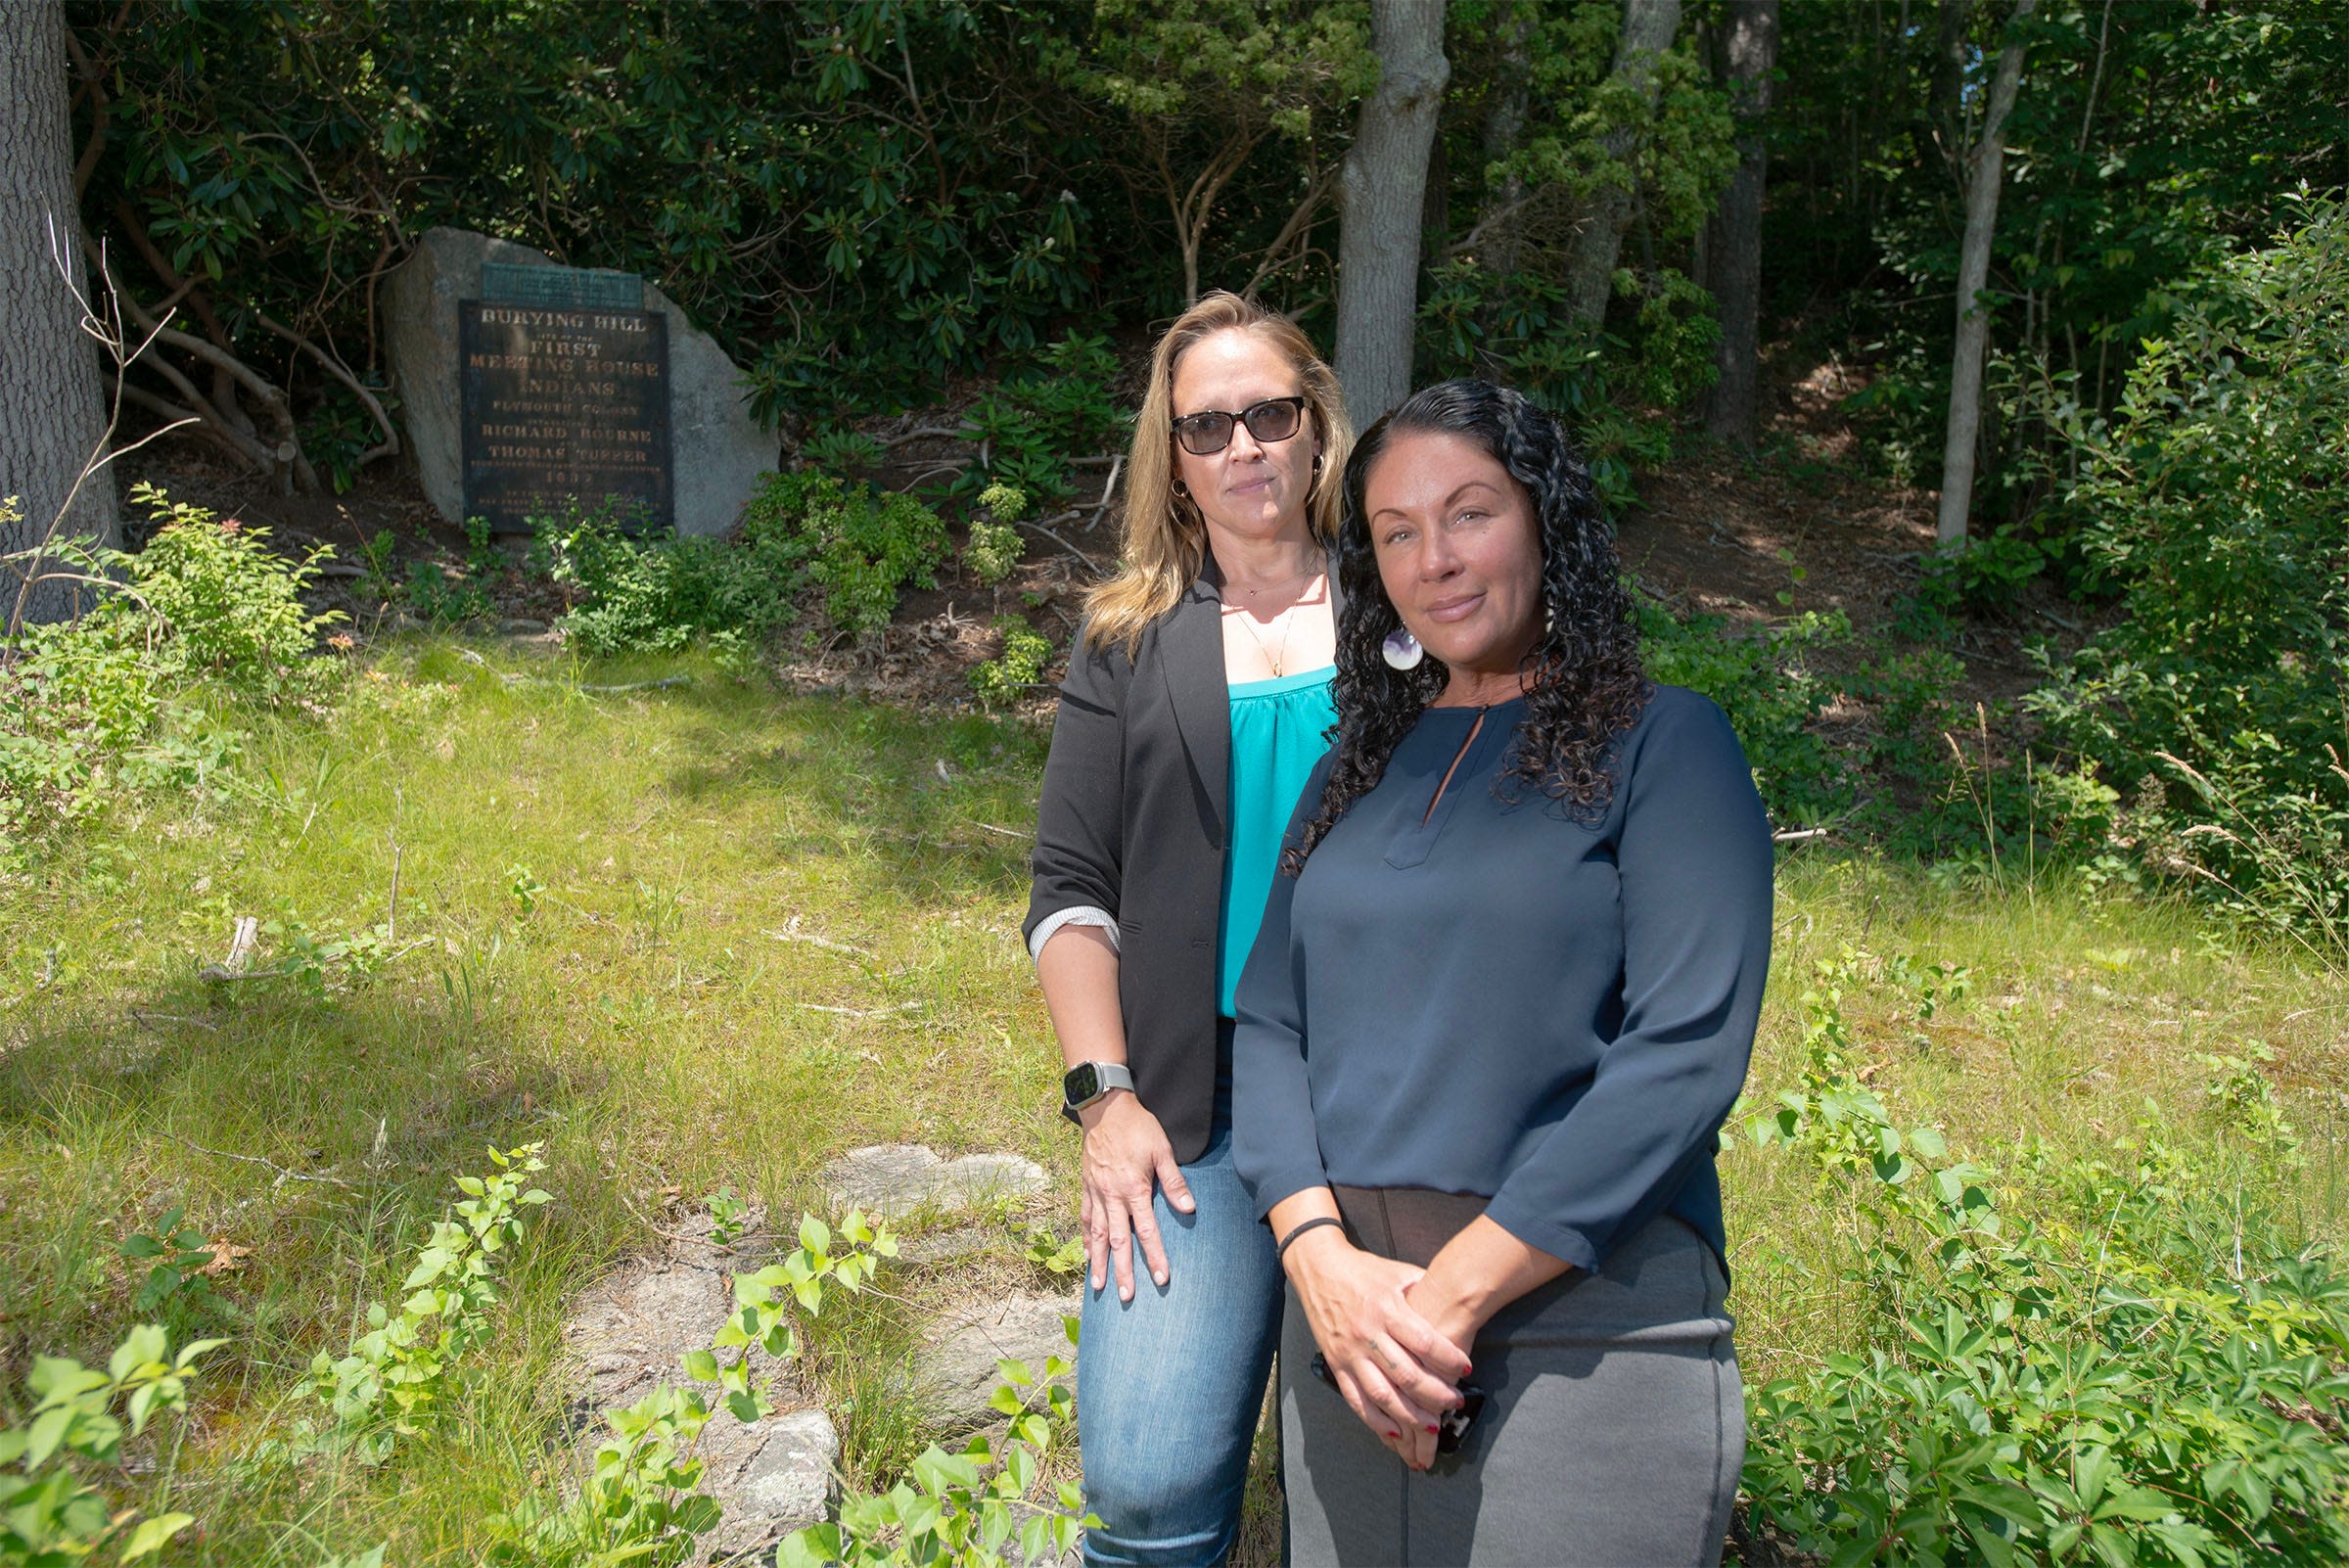 What is buried at Burying Hill in Bourne? Herring Pond Wampanoag tribe wants to find out